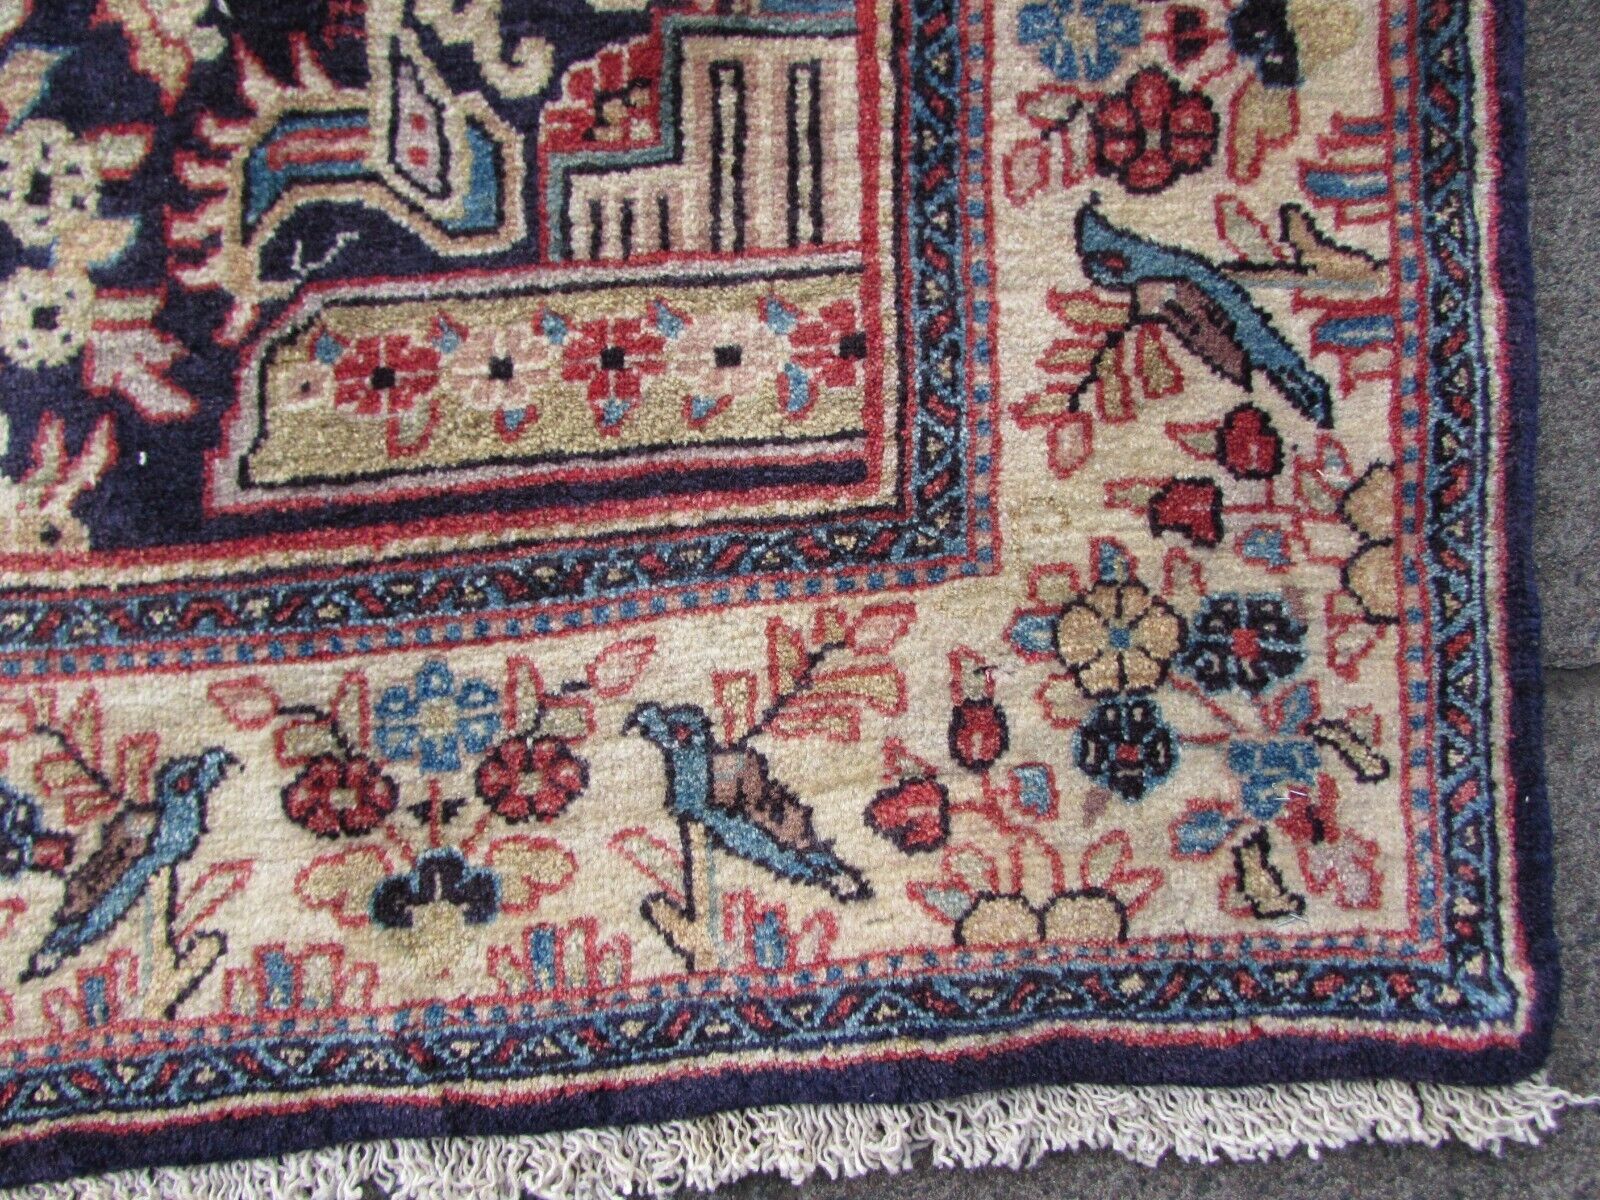 Handmade vintage Persian Kashan rug in prayer design with birds and flowers. The rug is from the end of 20th century in original good condition.